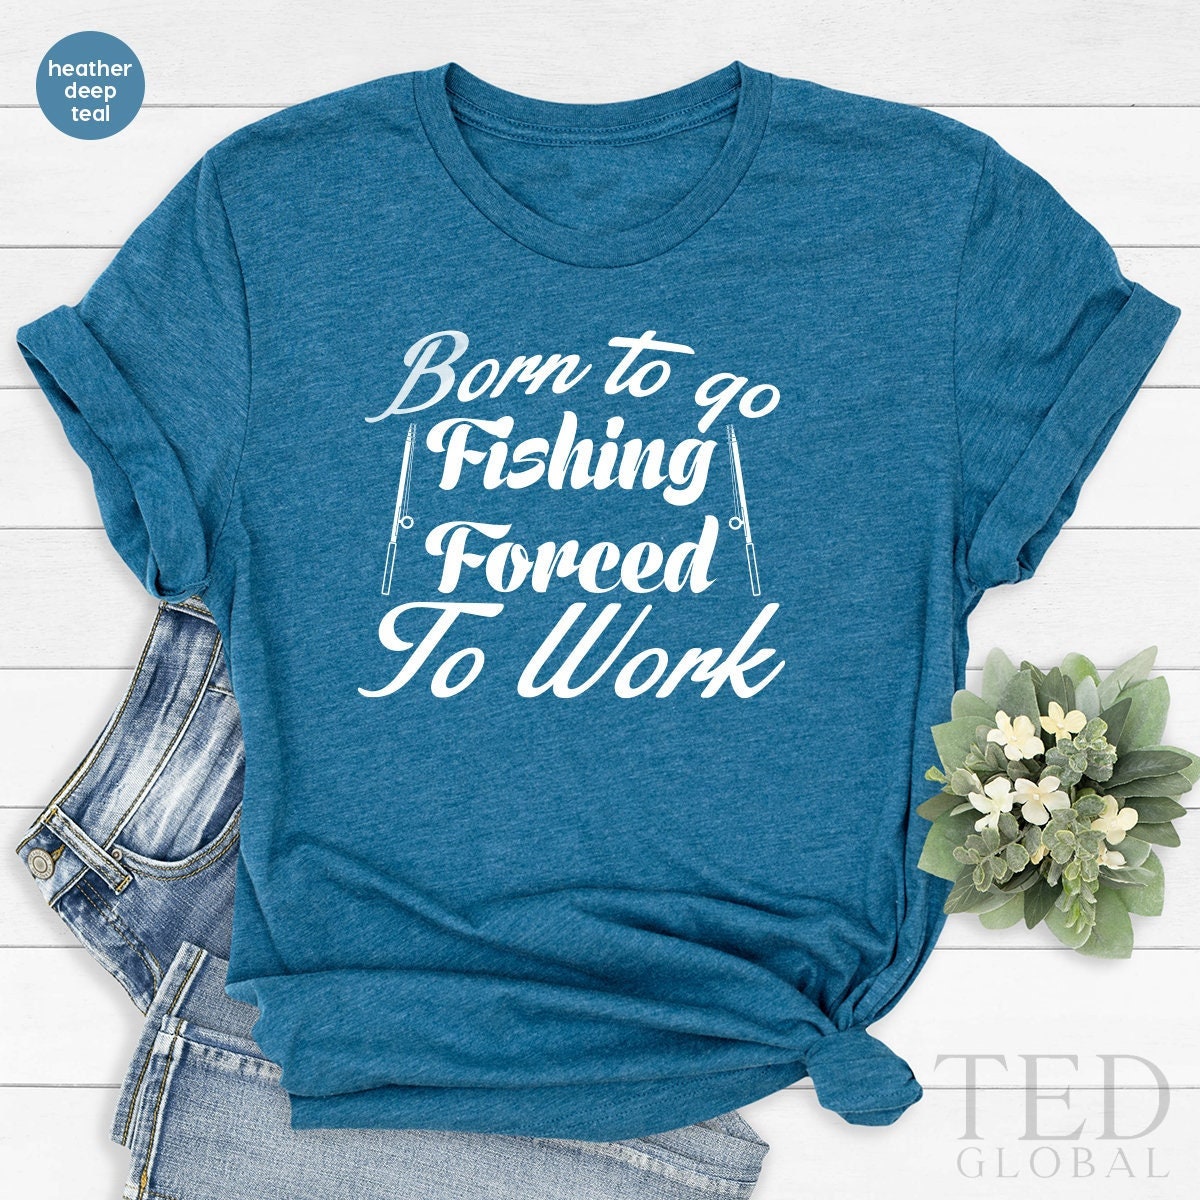 Born to Fish - Funny Fishing Shirts Gift for Men - Graphic T